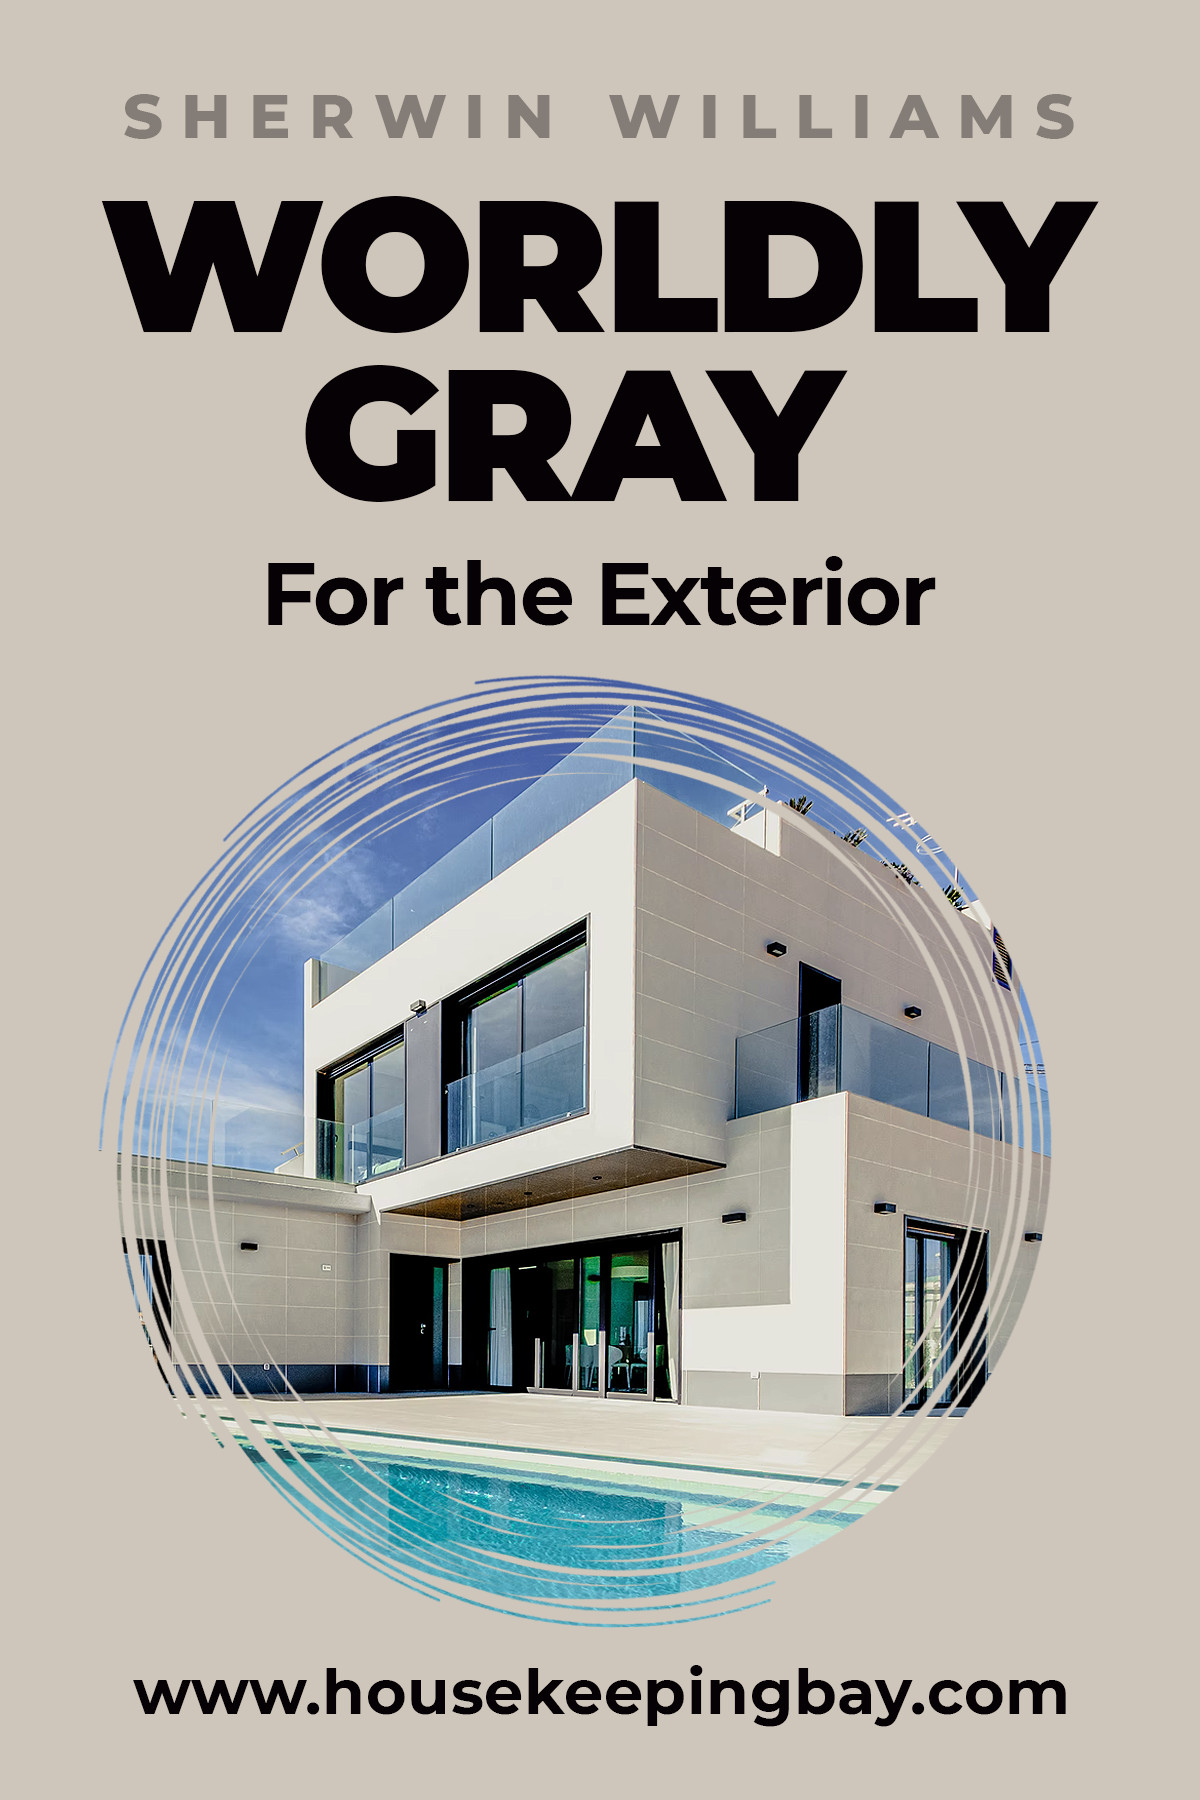 Worldly Gray for the exterior